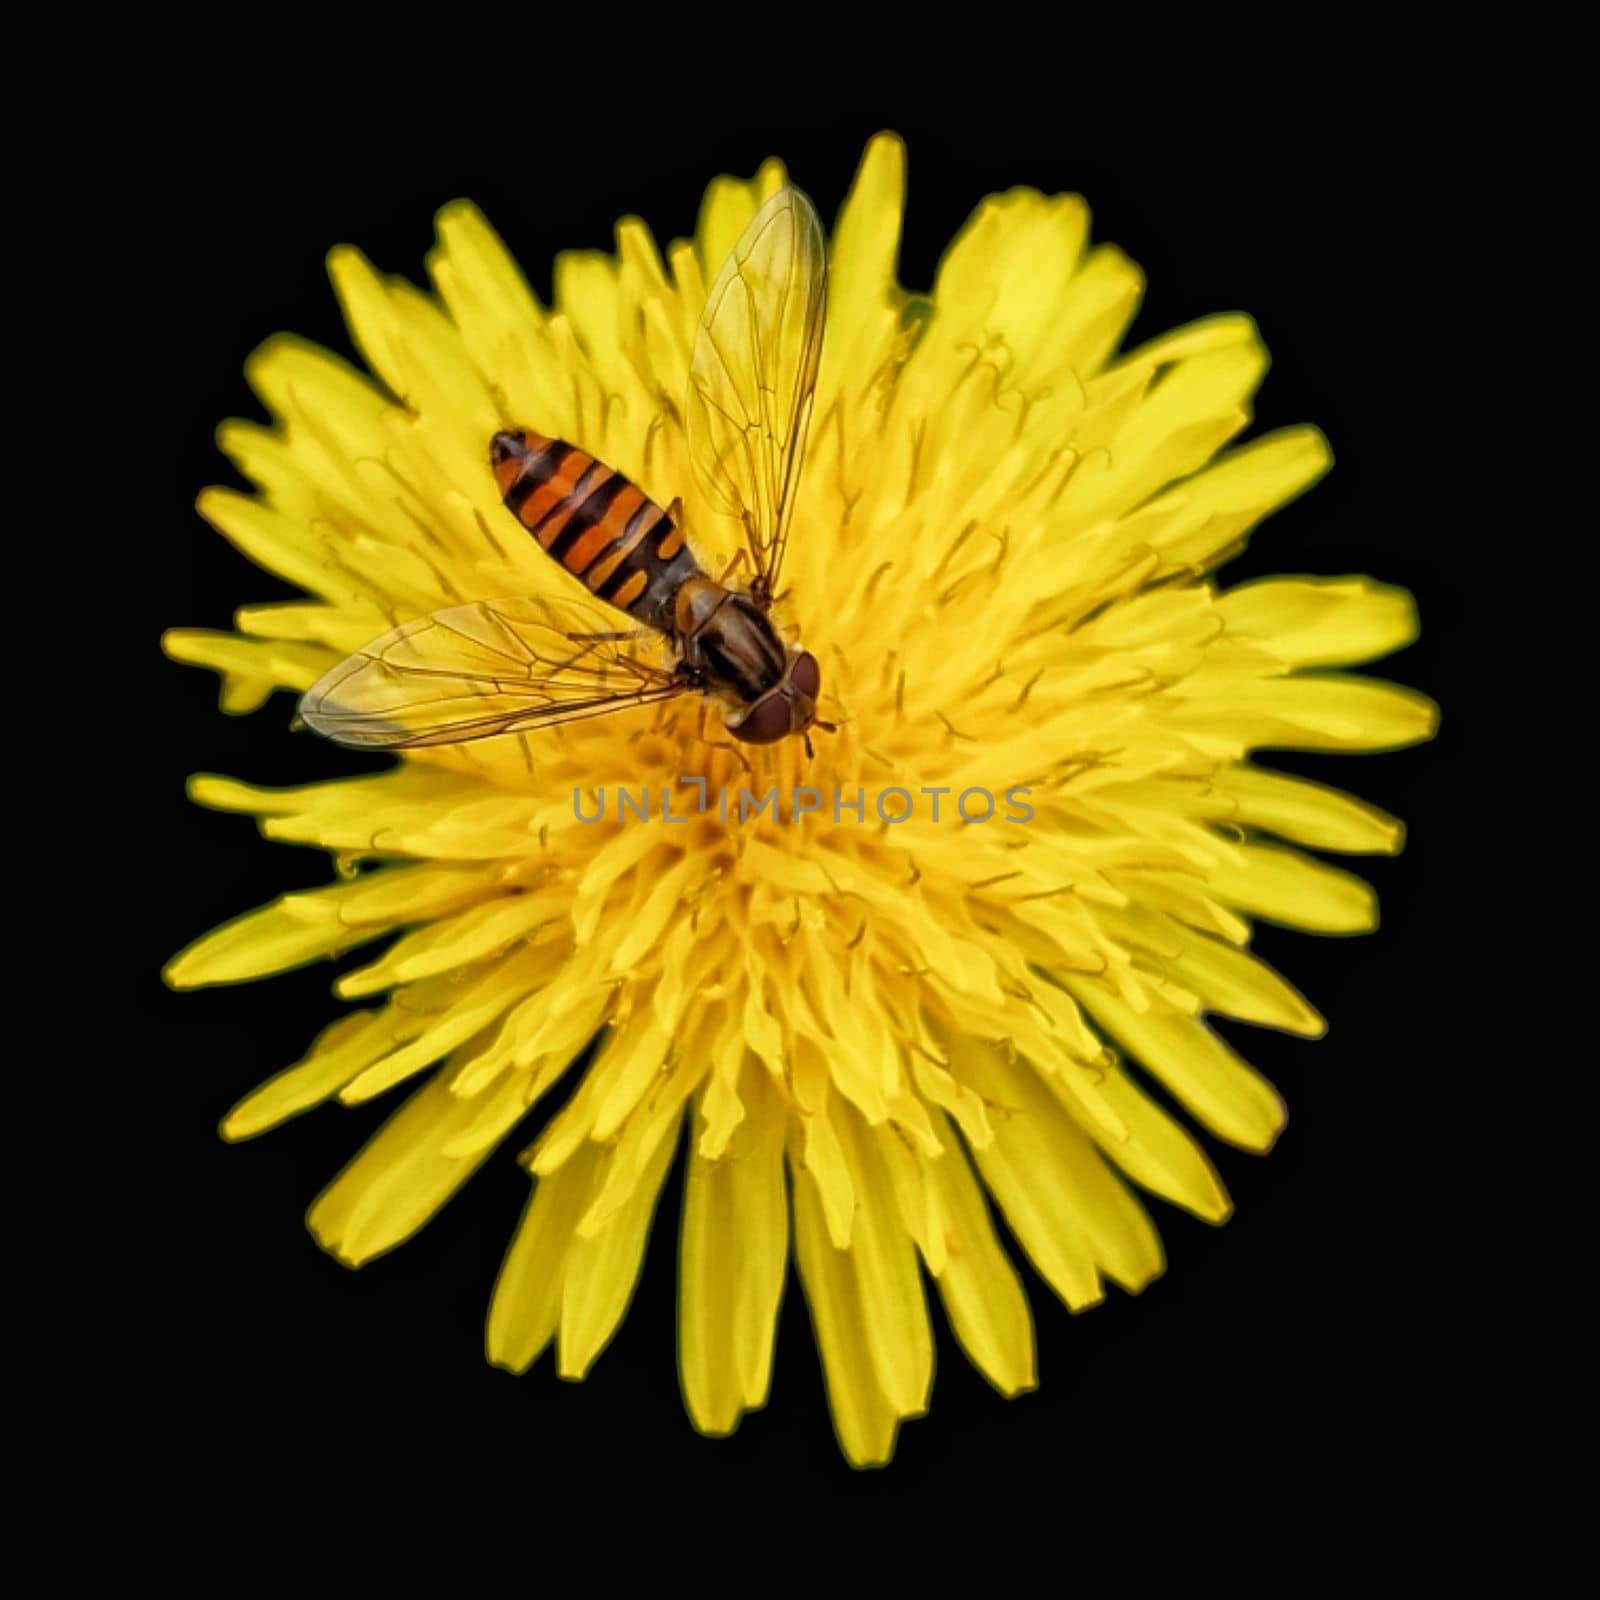 dandelion and bee isolated on black background by gallofoto